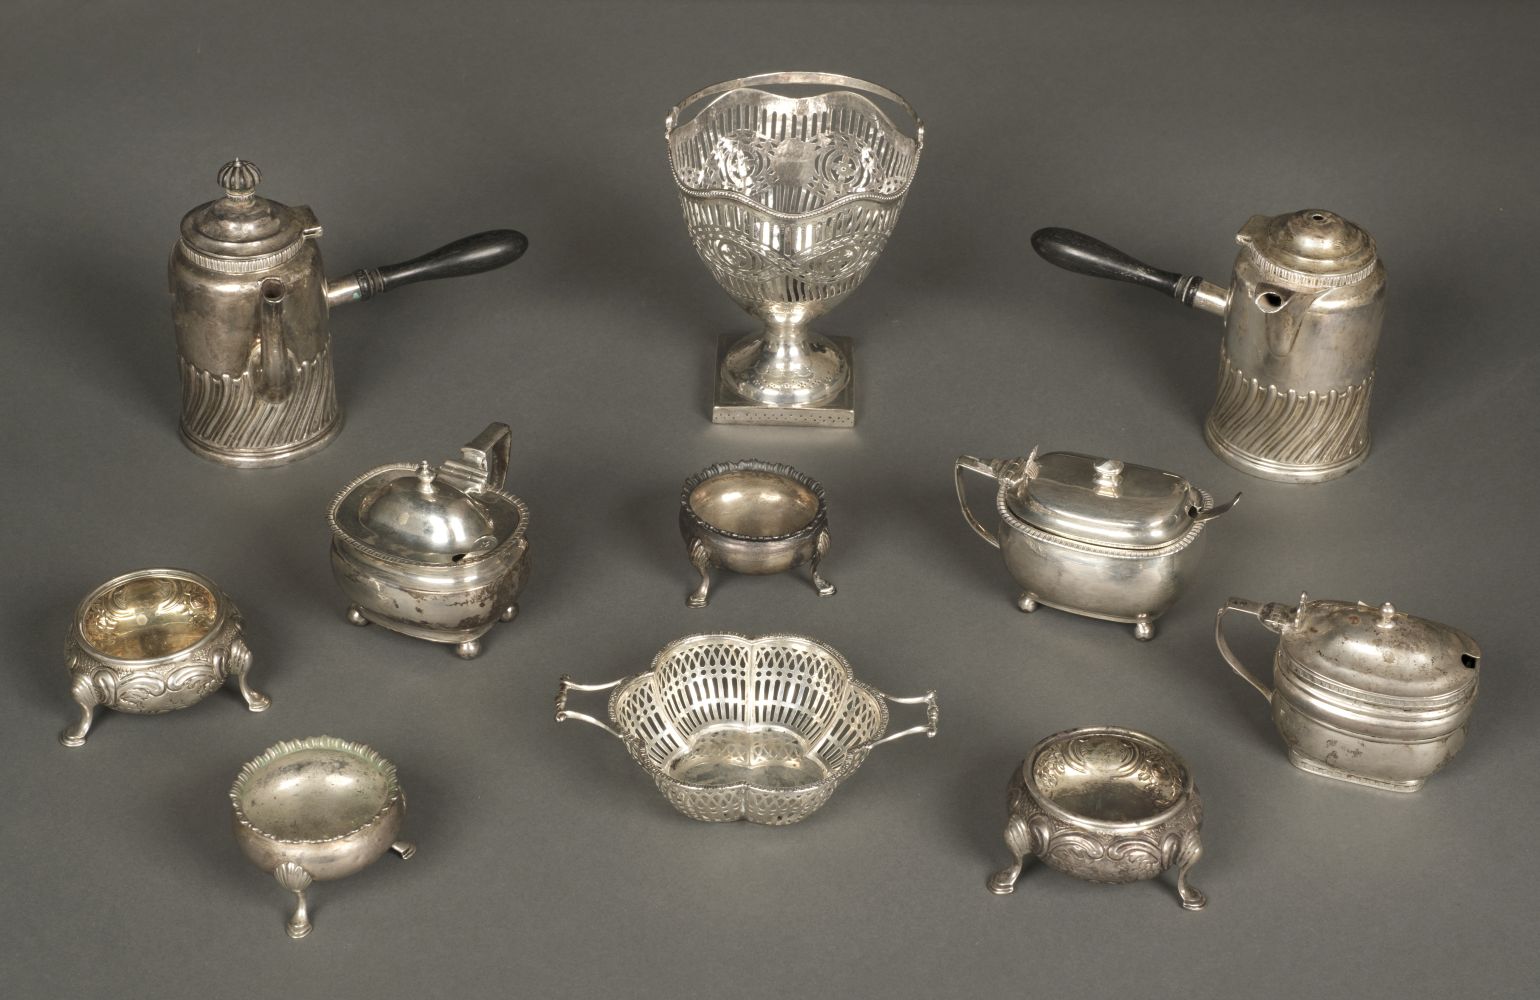 * Mixed Silver. A collection of silver